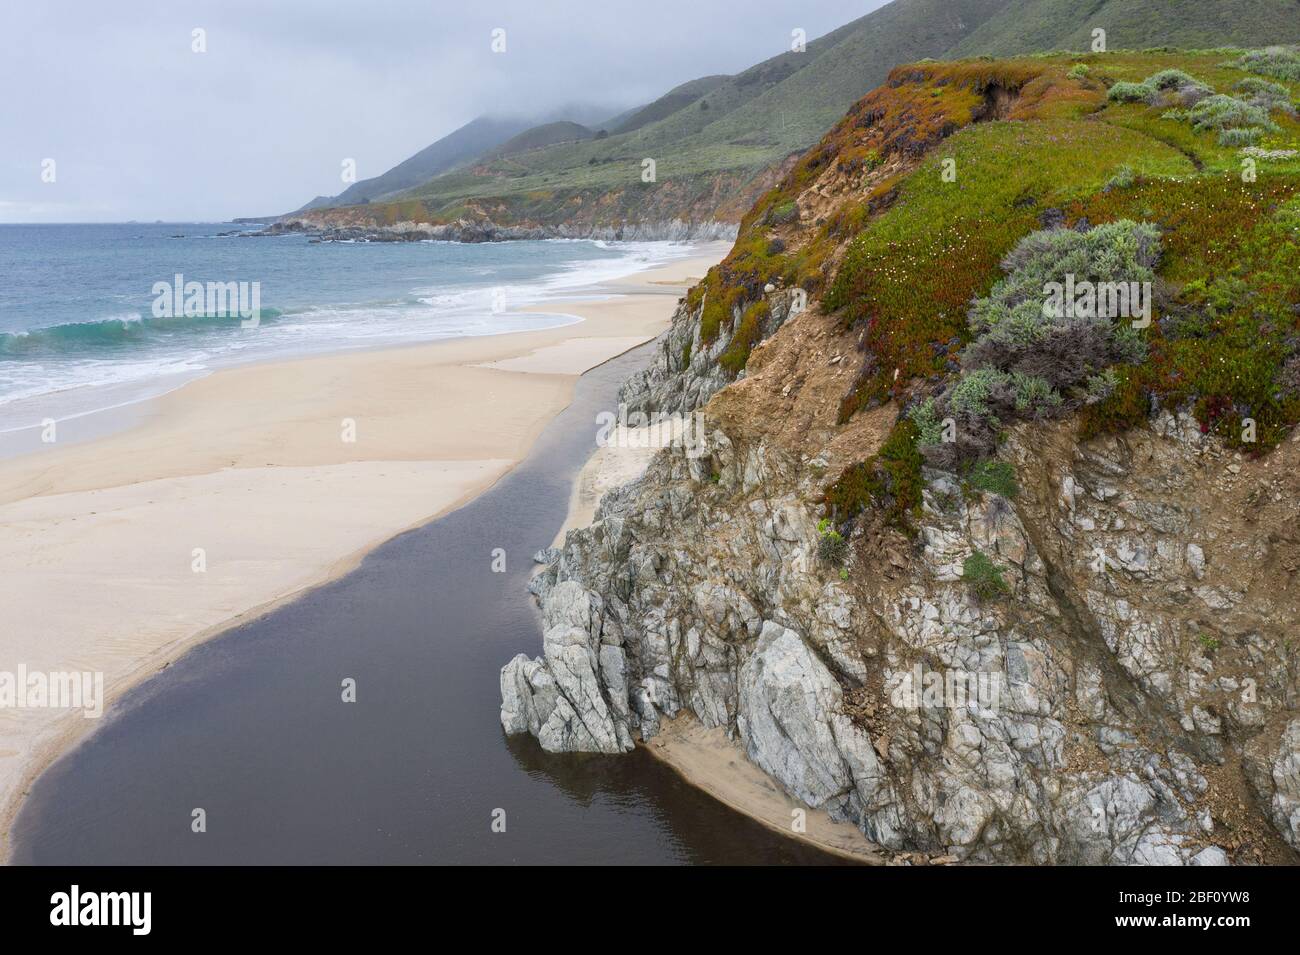 The Pacific Ocean washes against a scenic beach in Northern California. This part of the west coast is one of the most beautiful regions in America. Stock Photo